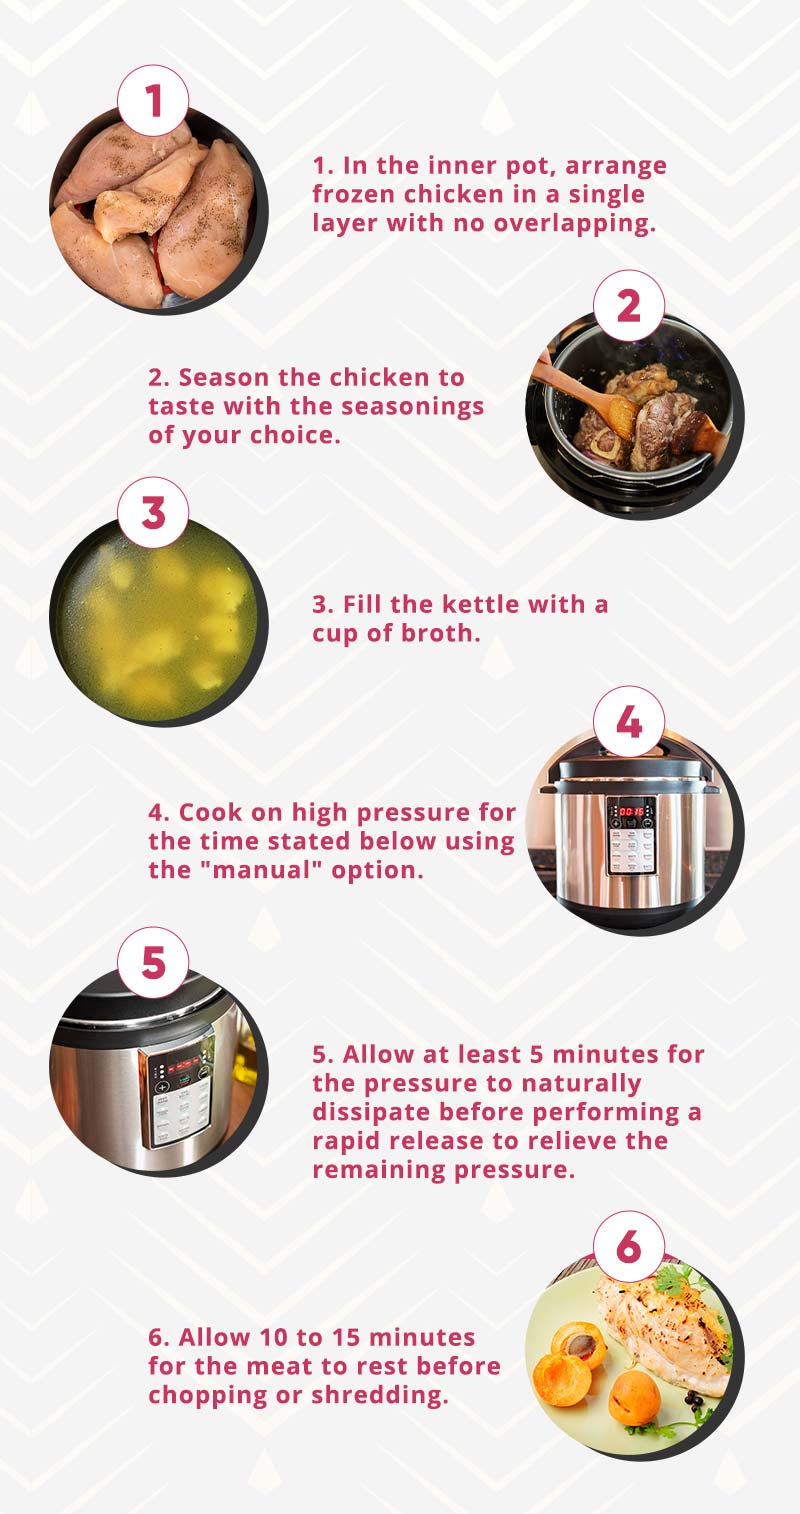 Steps For Cooking Frozen Chicken In The Air Fryer